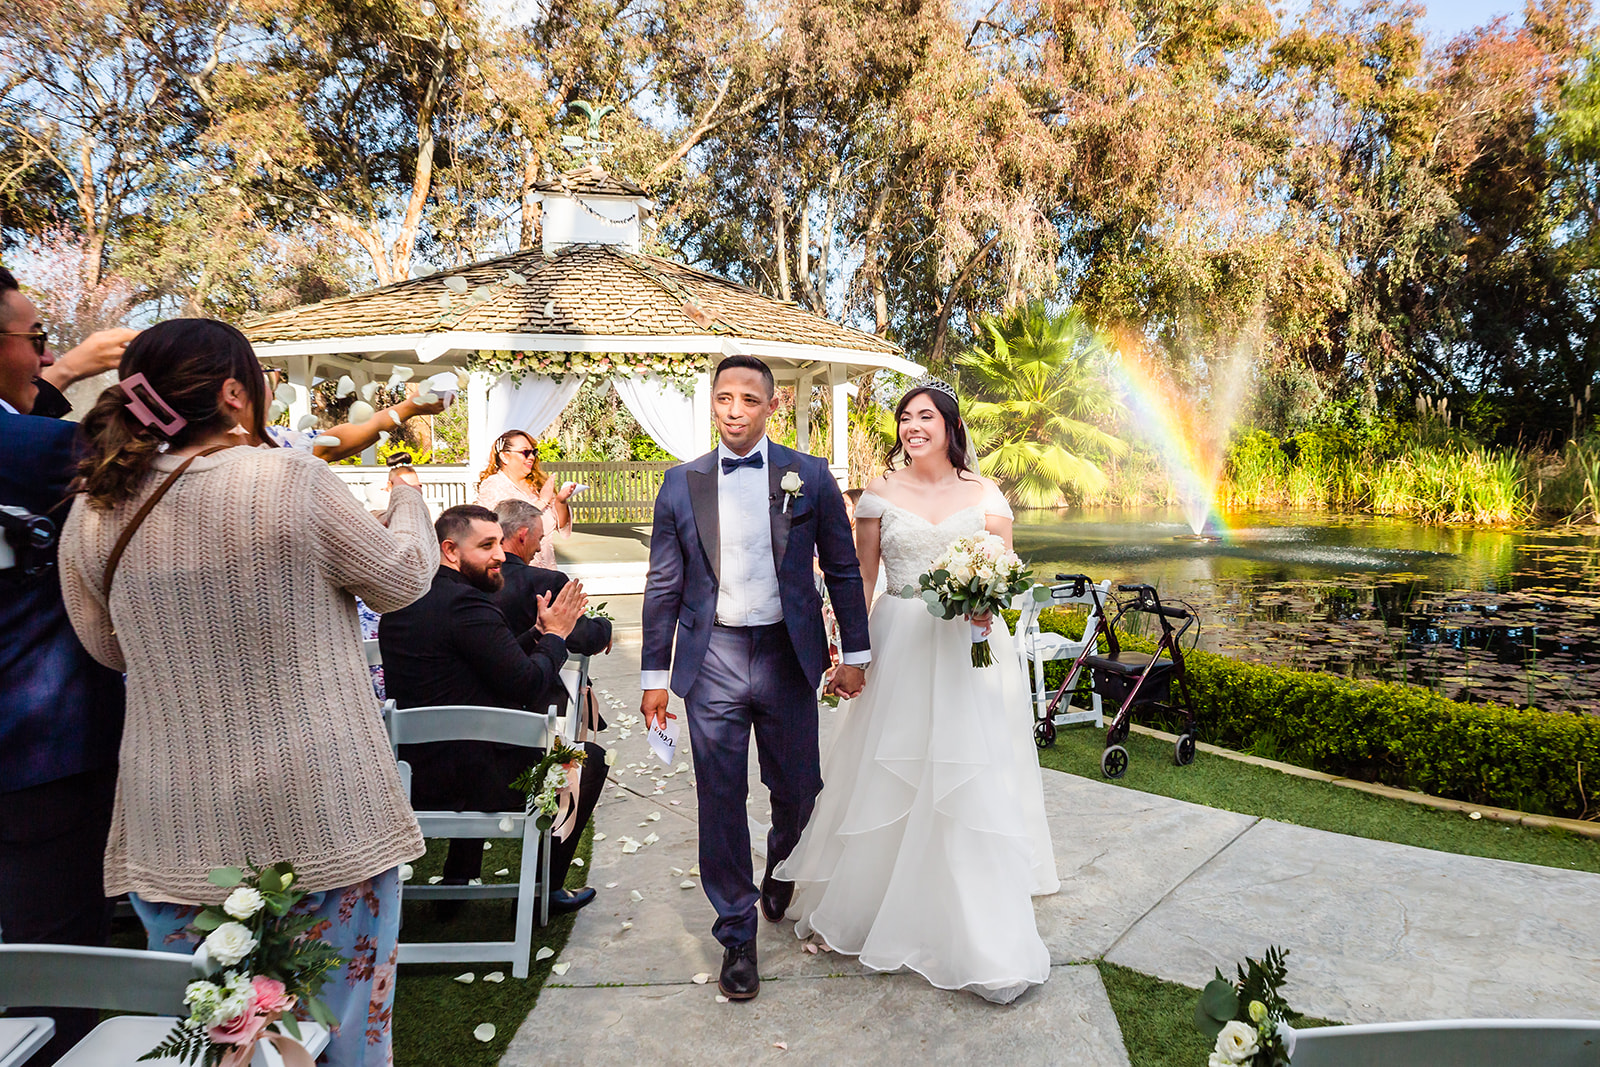 Newlyweds walk down the aisle together at The Orchard by Wedgewood in Menifee, CA